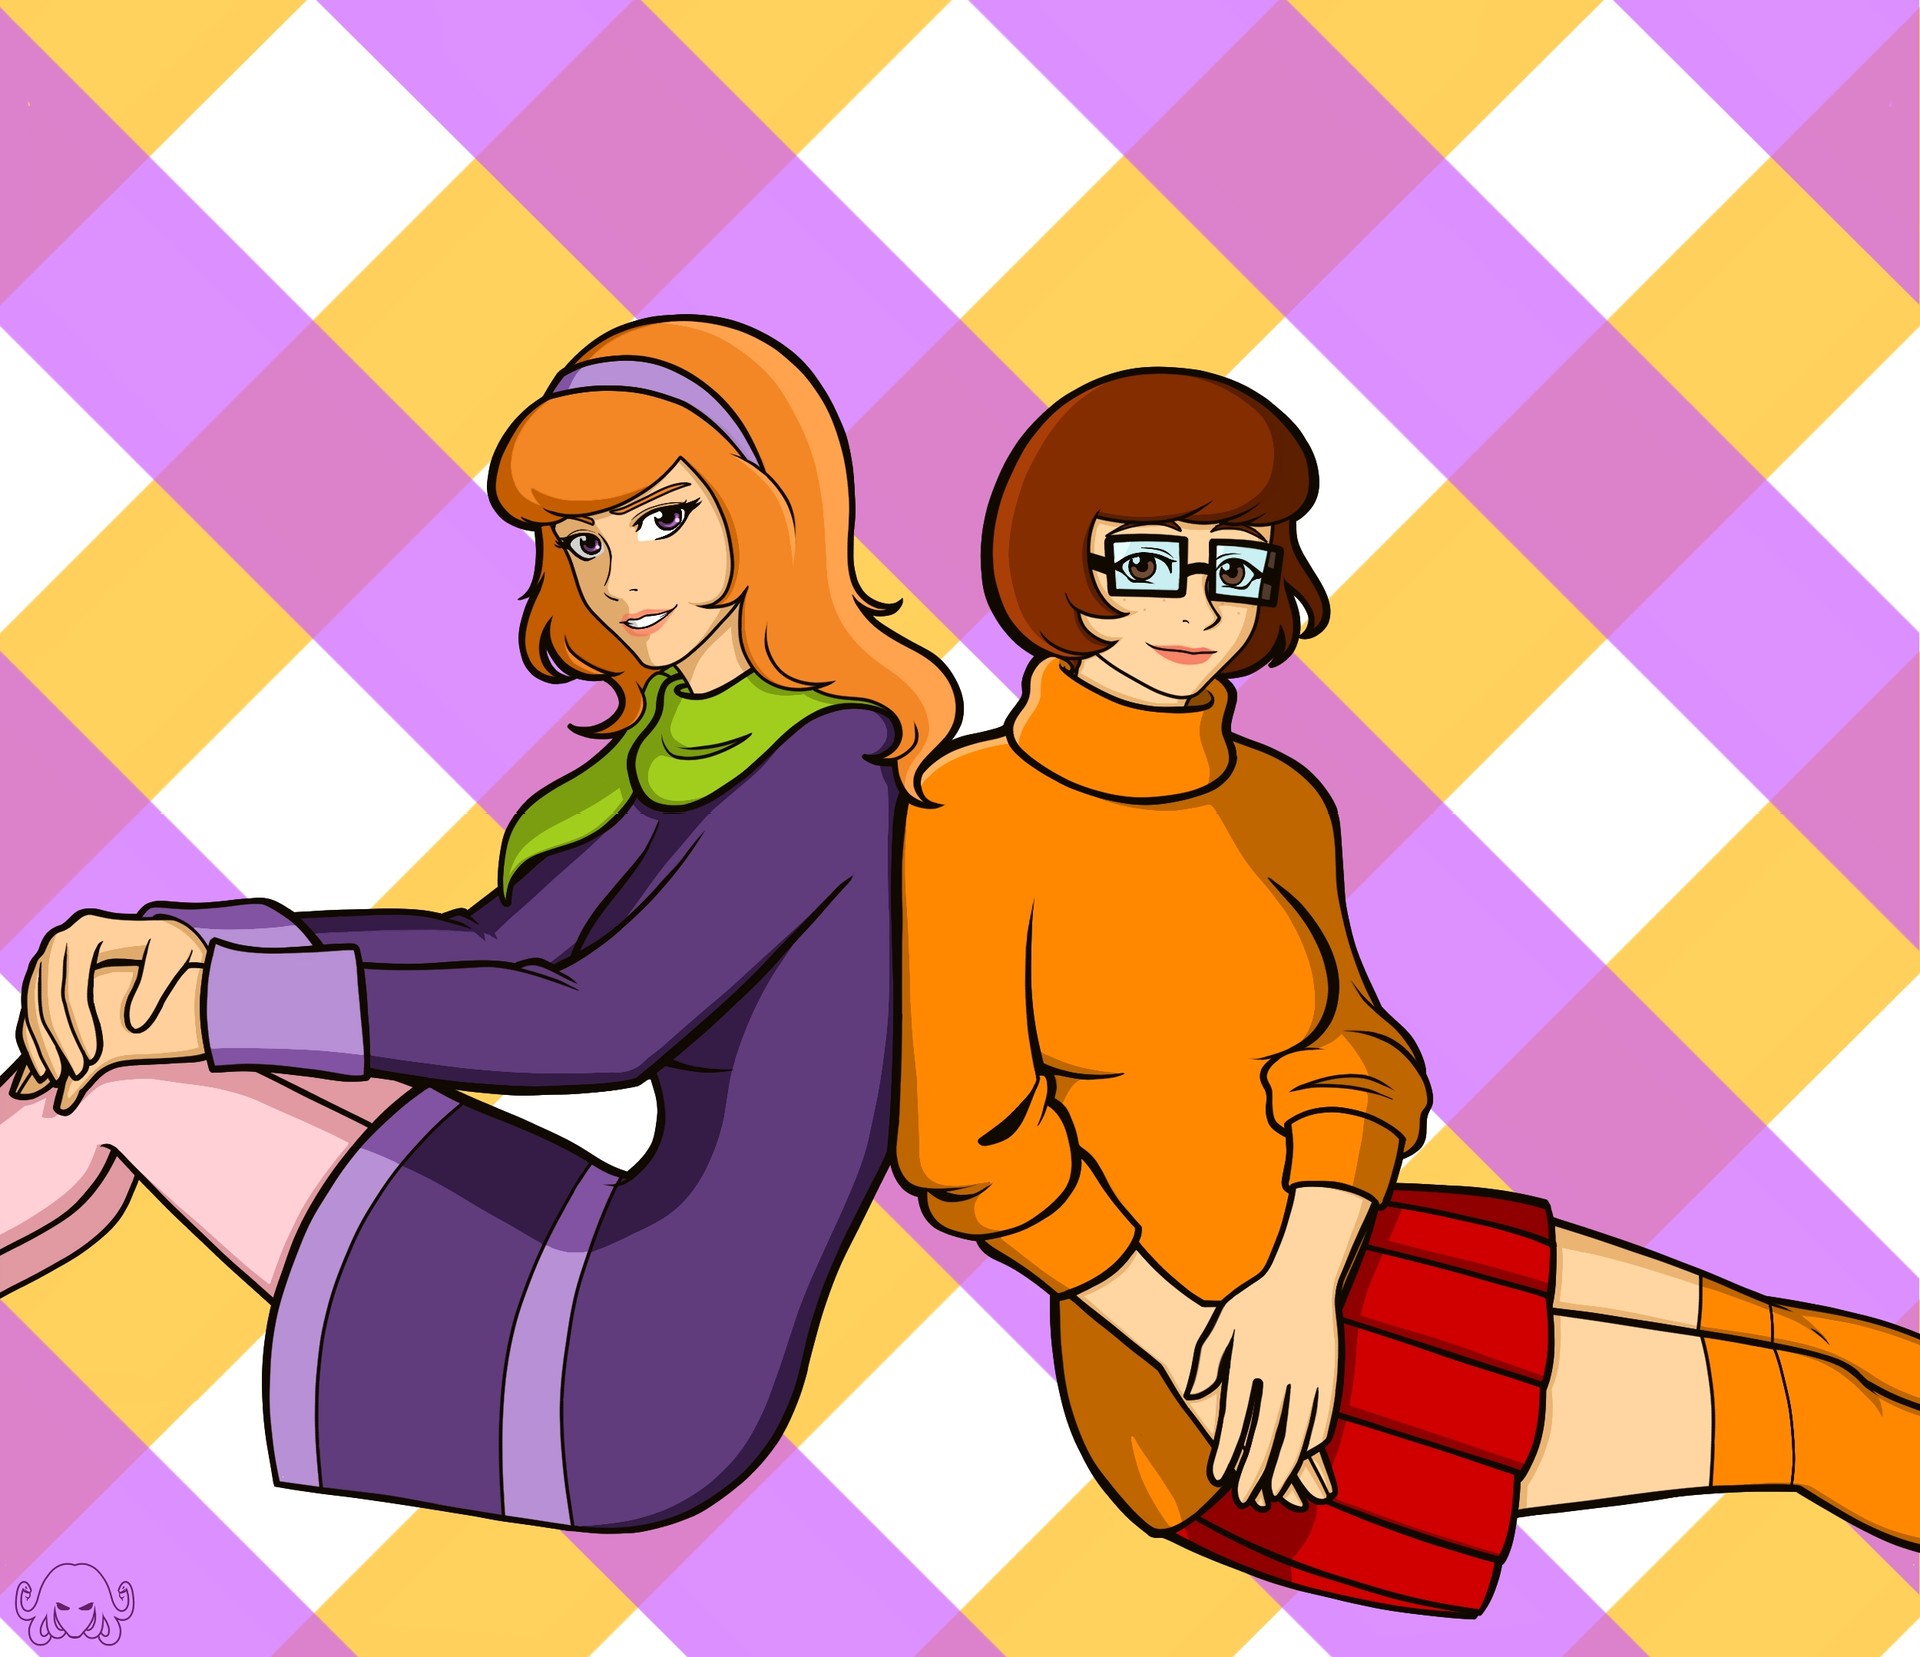 The Lovely Ladies of Scooby Doo.